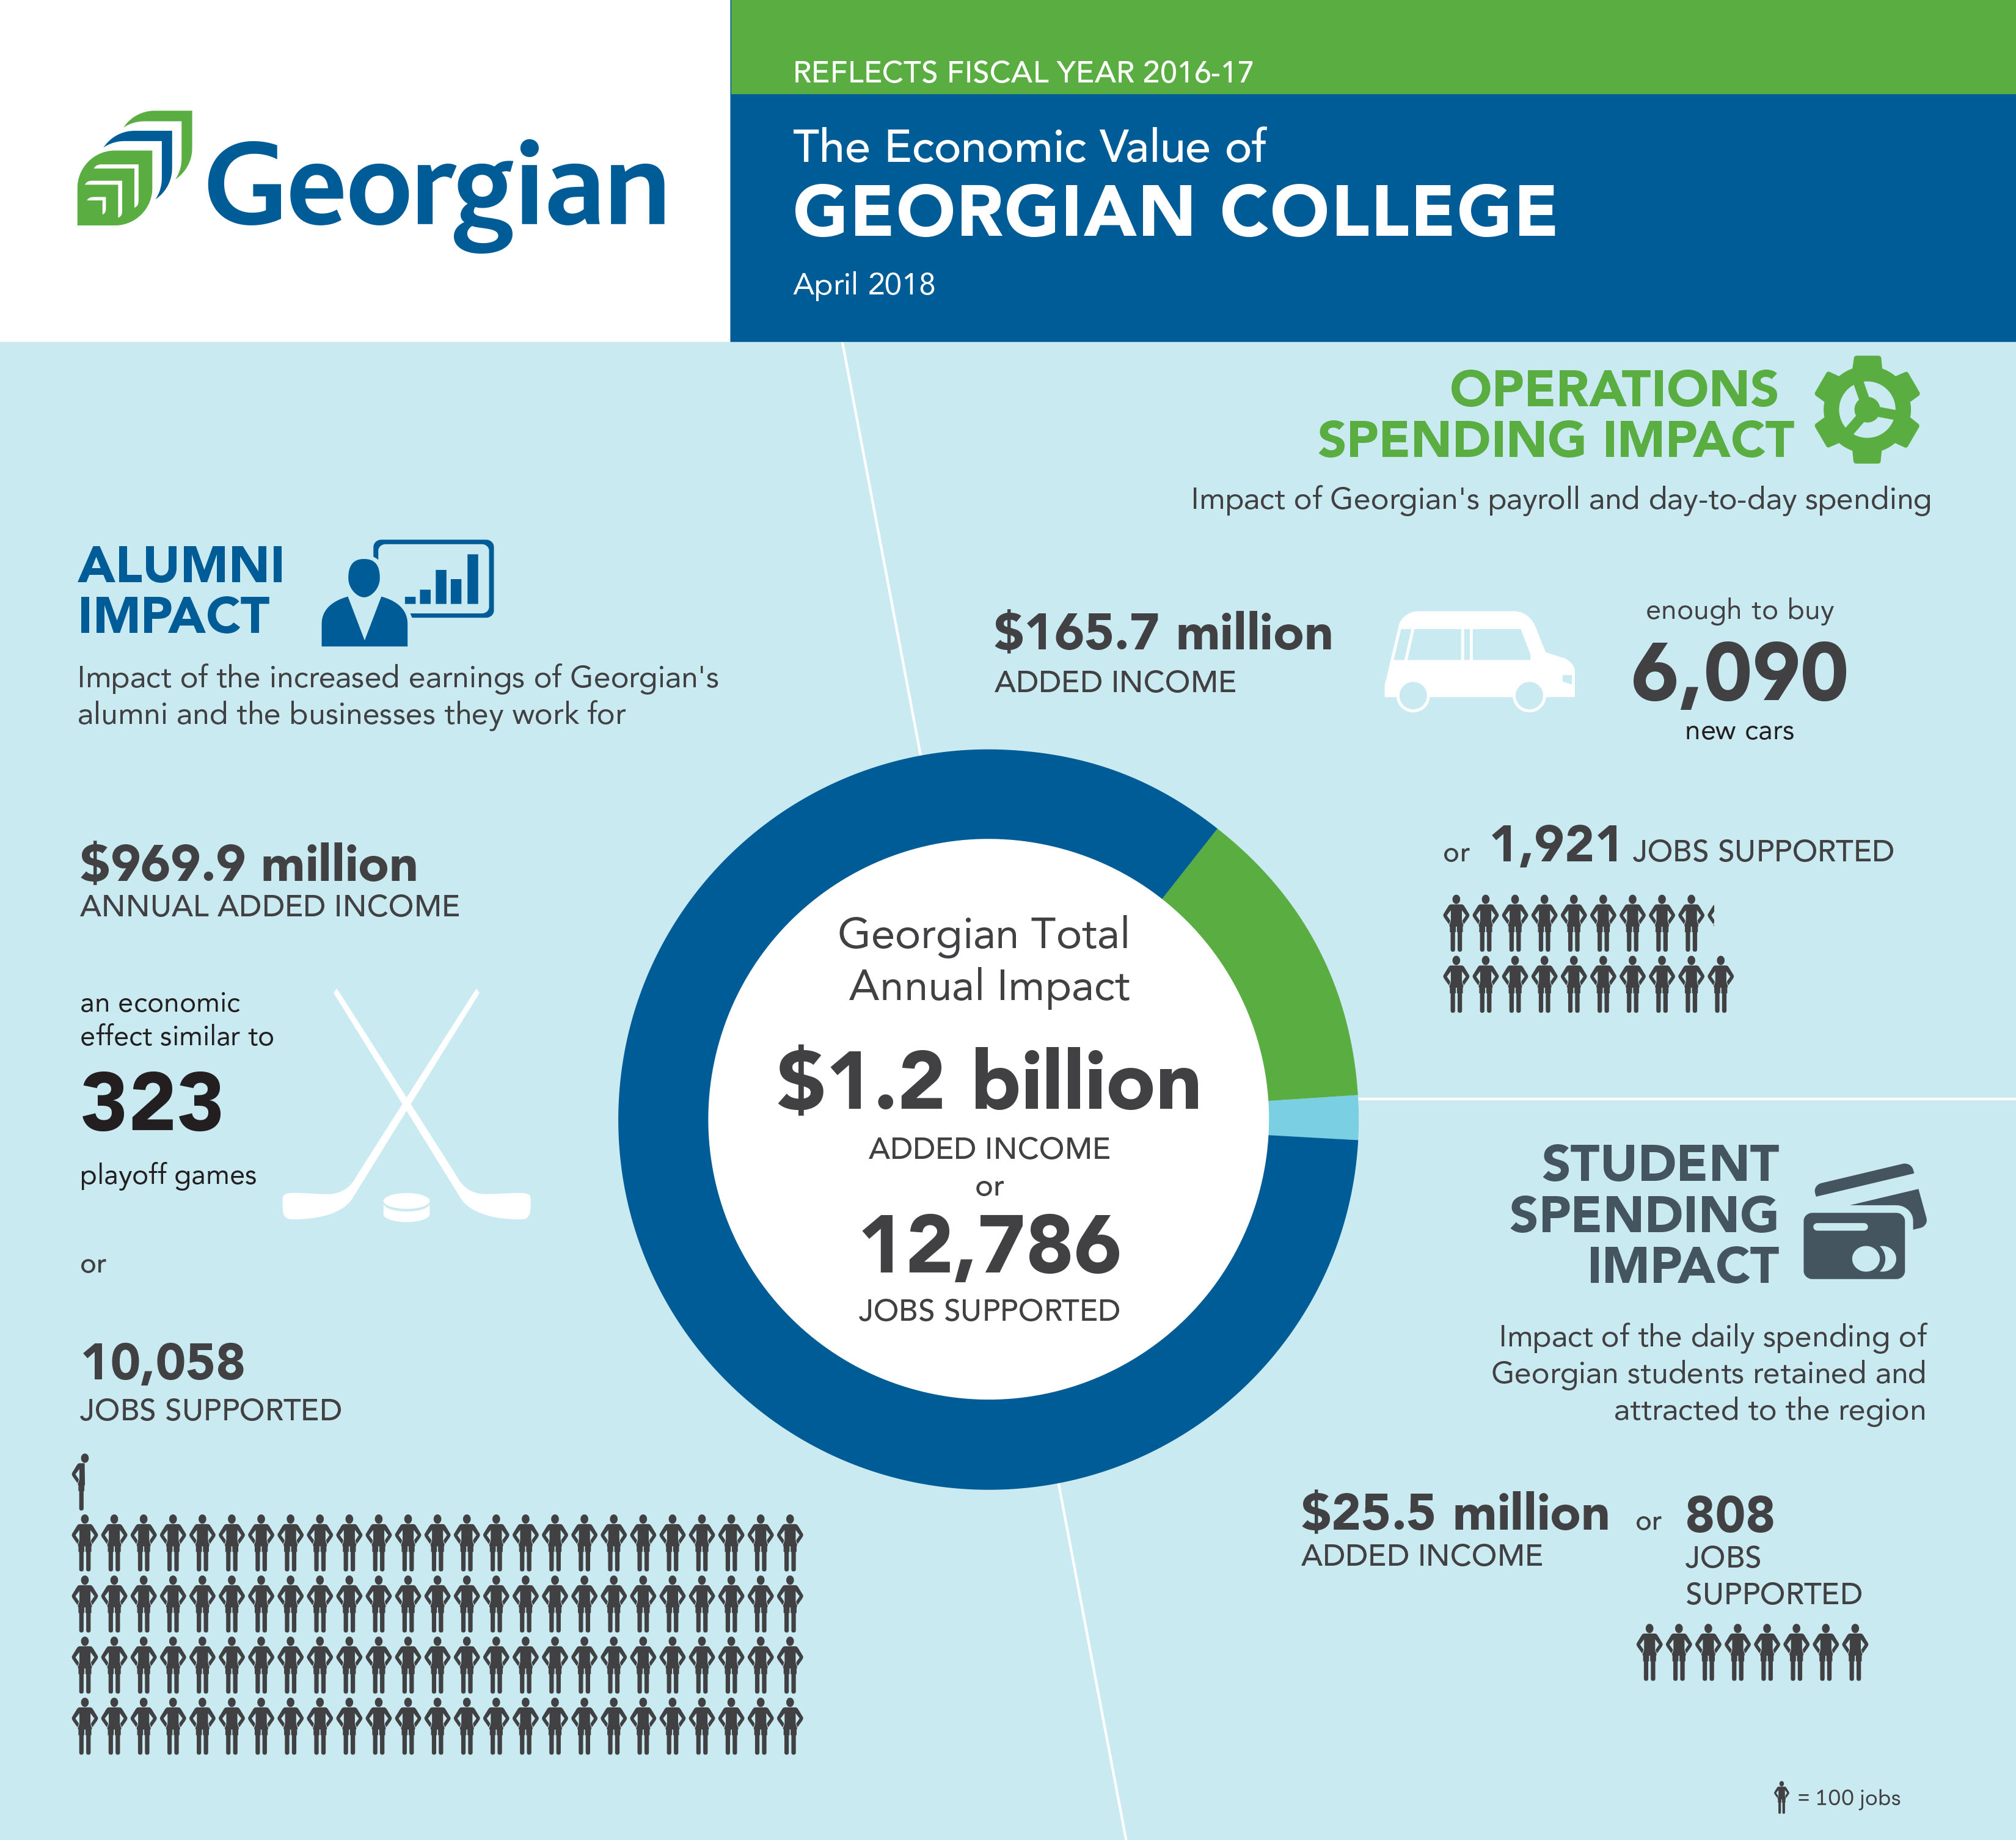 The economic value of Georgian College: $1.2 billion added income, 12,786 jobs supported